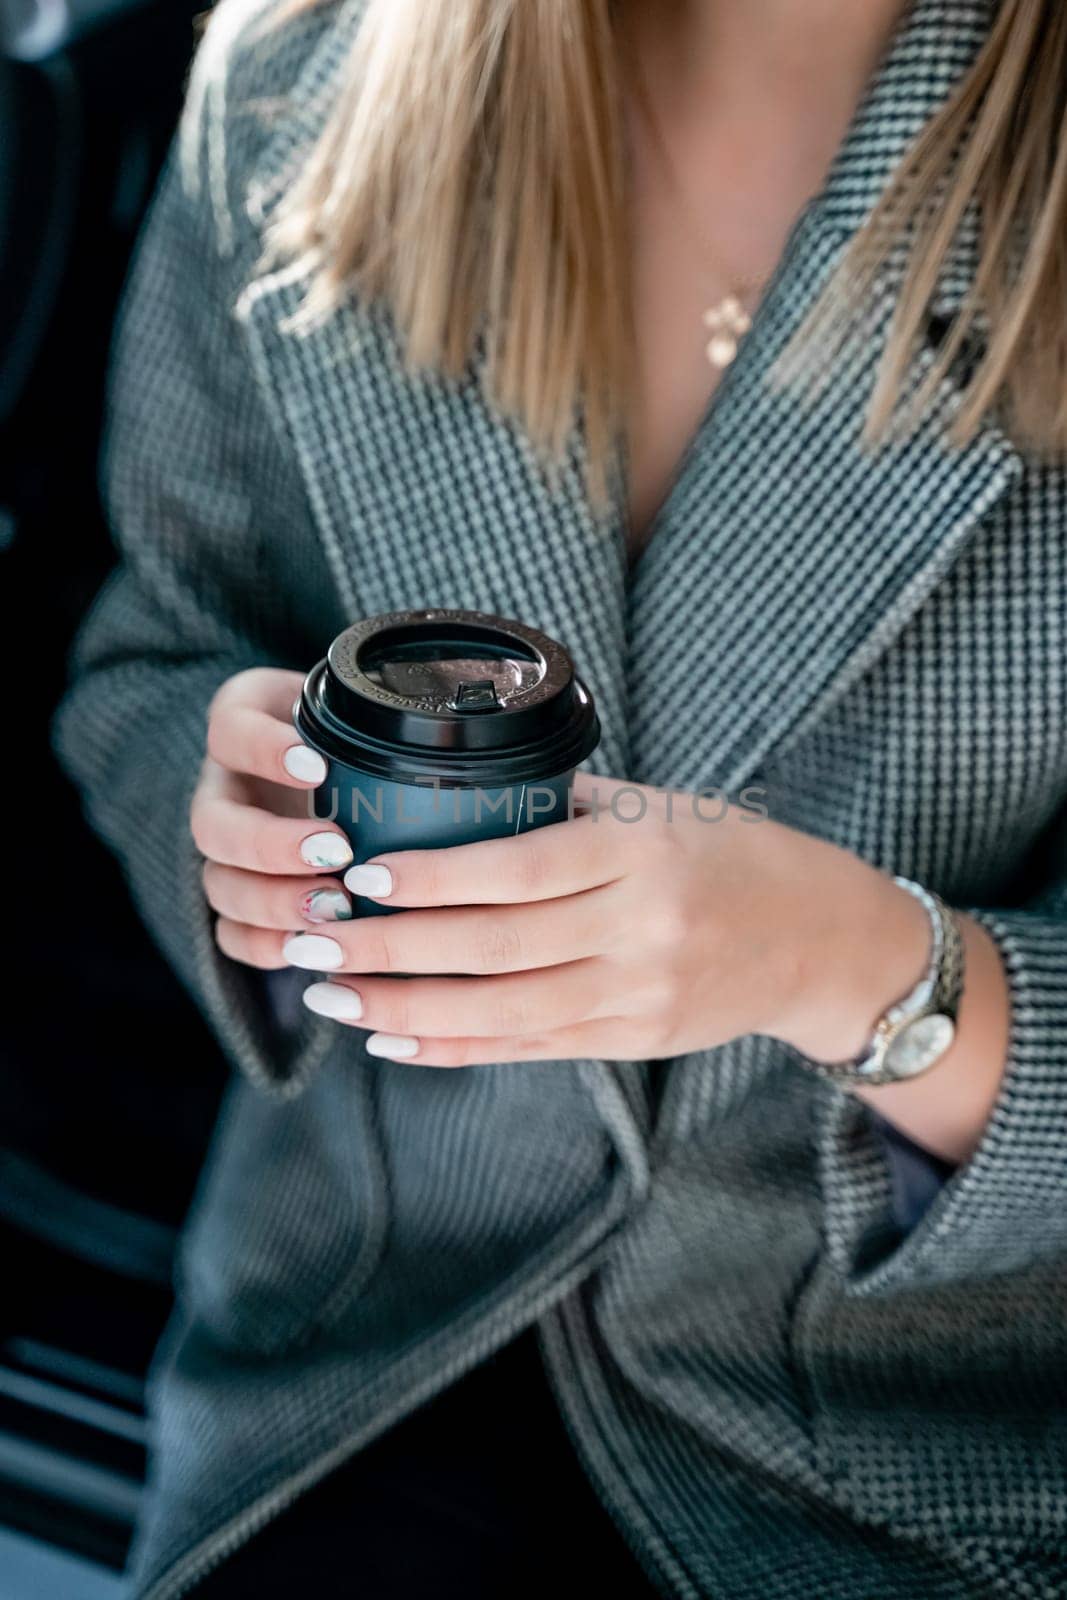 Happy woman coffee. she stands next to the car in the underground parking. Dressed in a gray coat, holding a glass of coffee in her hands, a black car